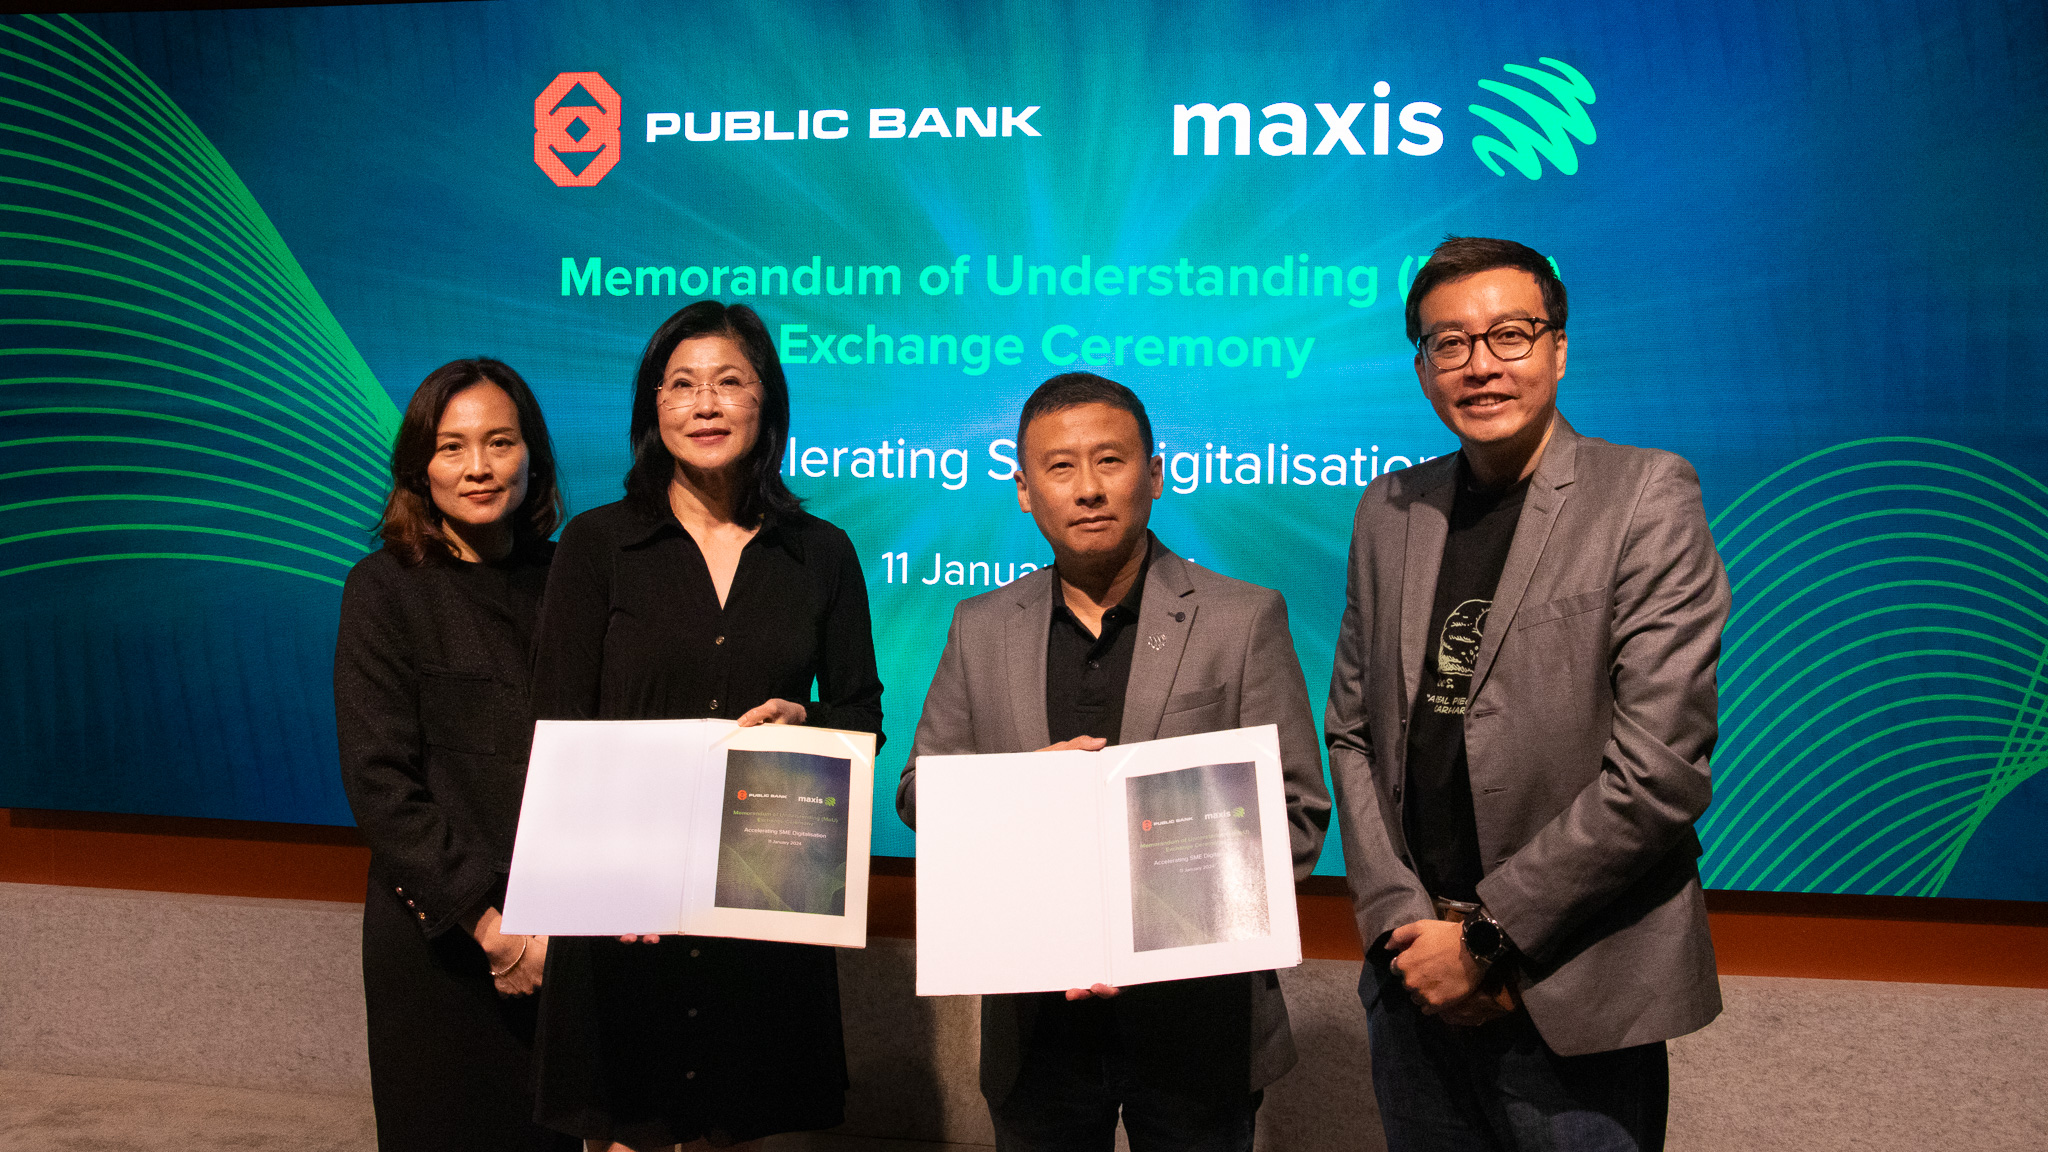 Photo Maxis and Public Bank MoU Exchange Ceremony on accelerating SME digitalisation